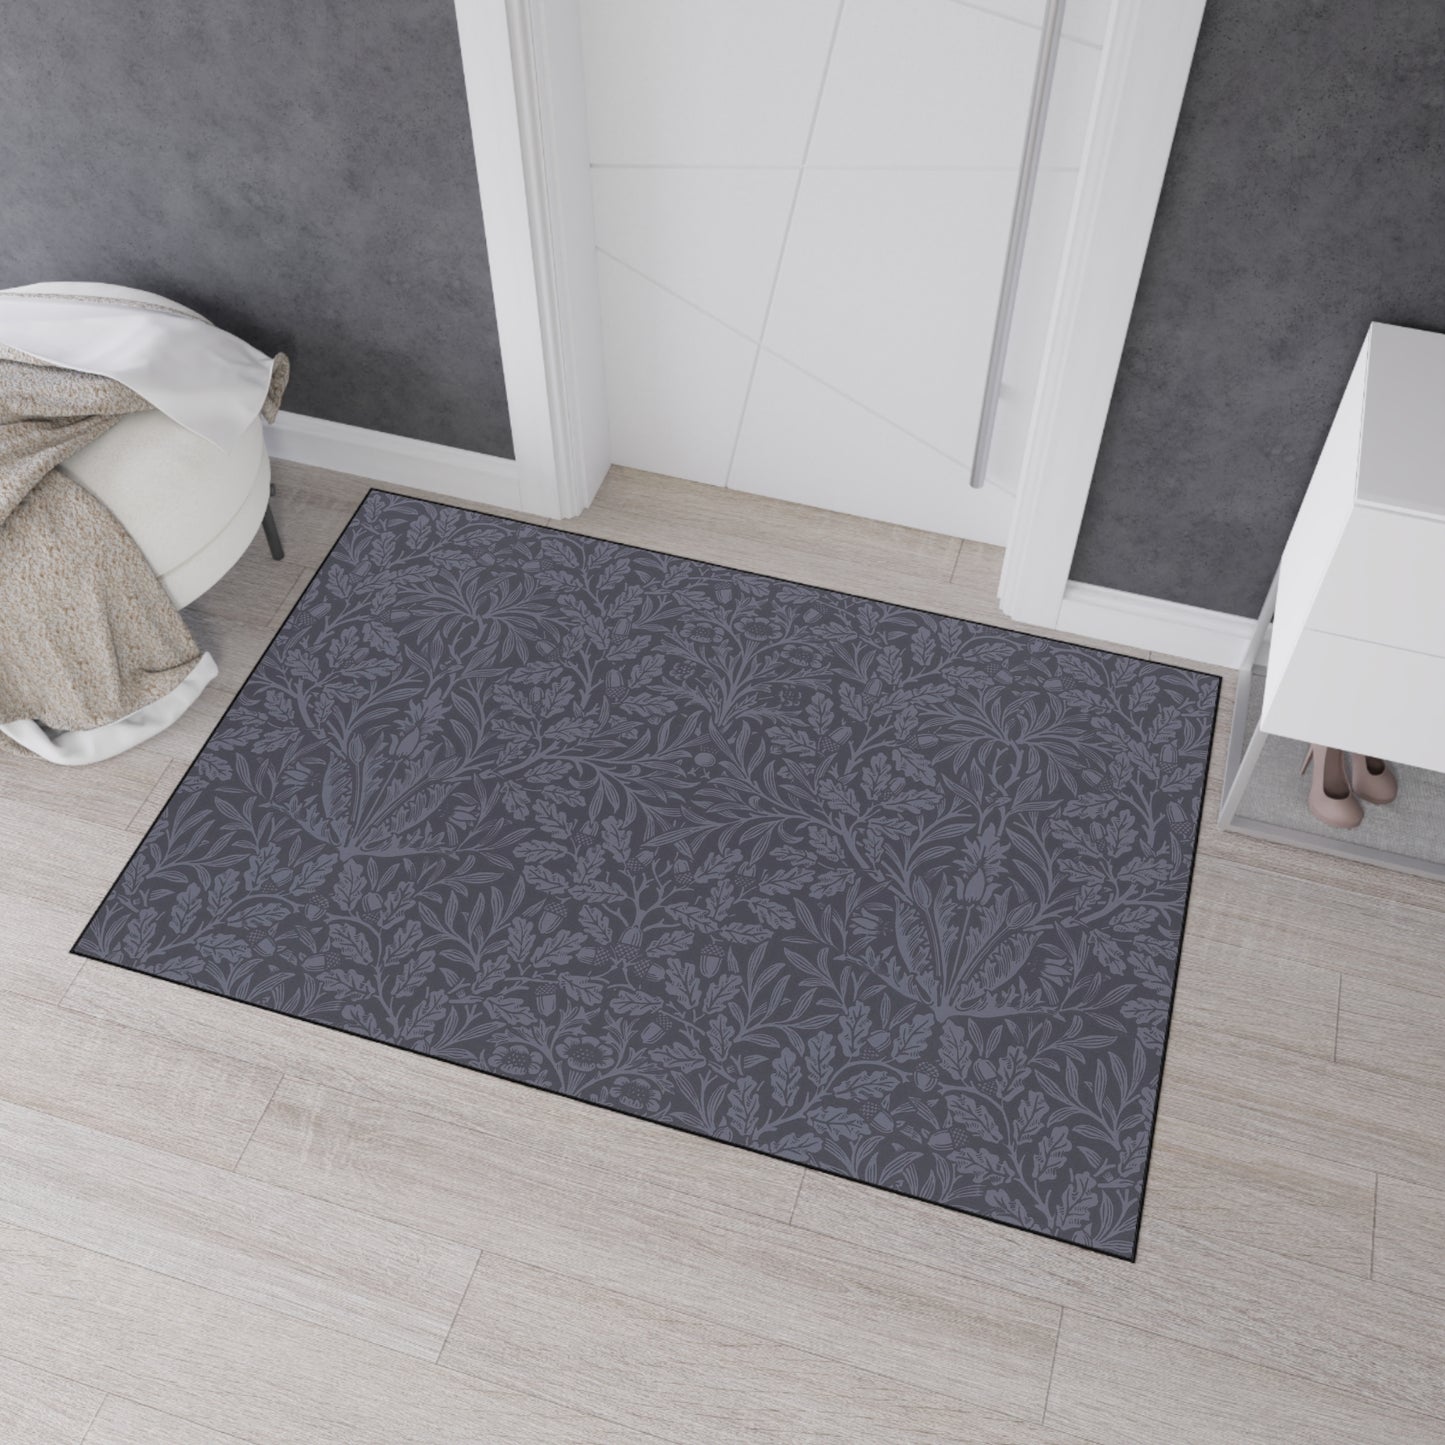 william-morris-co-heavy-duty-floor-mat-acorns-and-oak-leaves-collection-smoky-blue-9